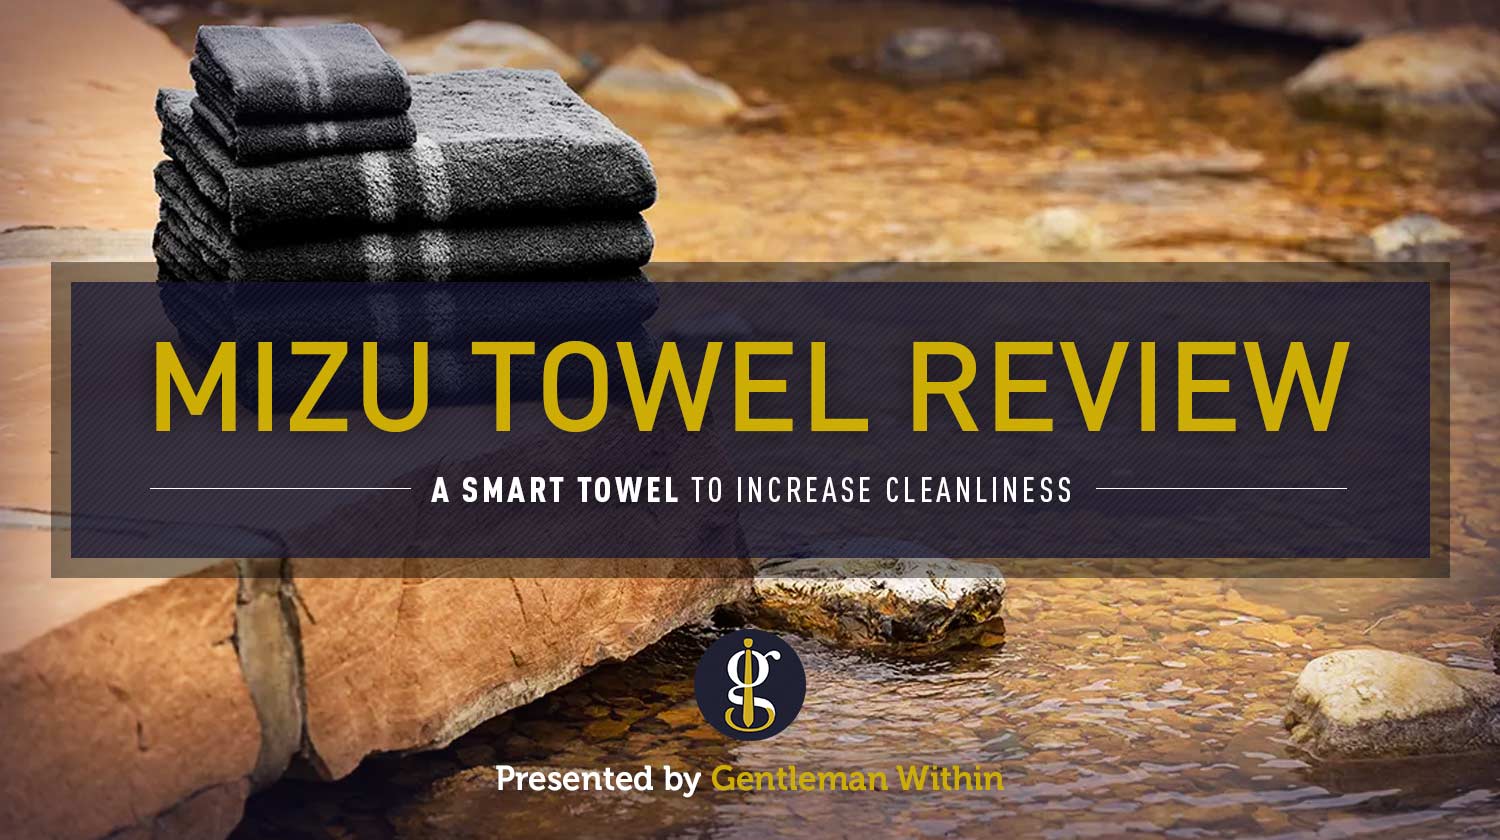 Mizu Towel Review: An Innovative Way to Increase Cleanliness | GENTLEMAN WITHIN